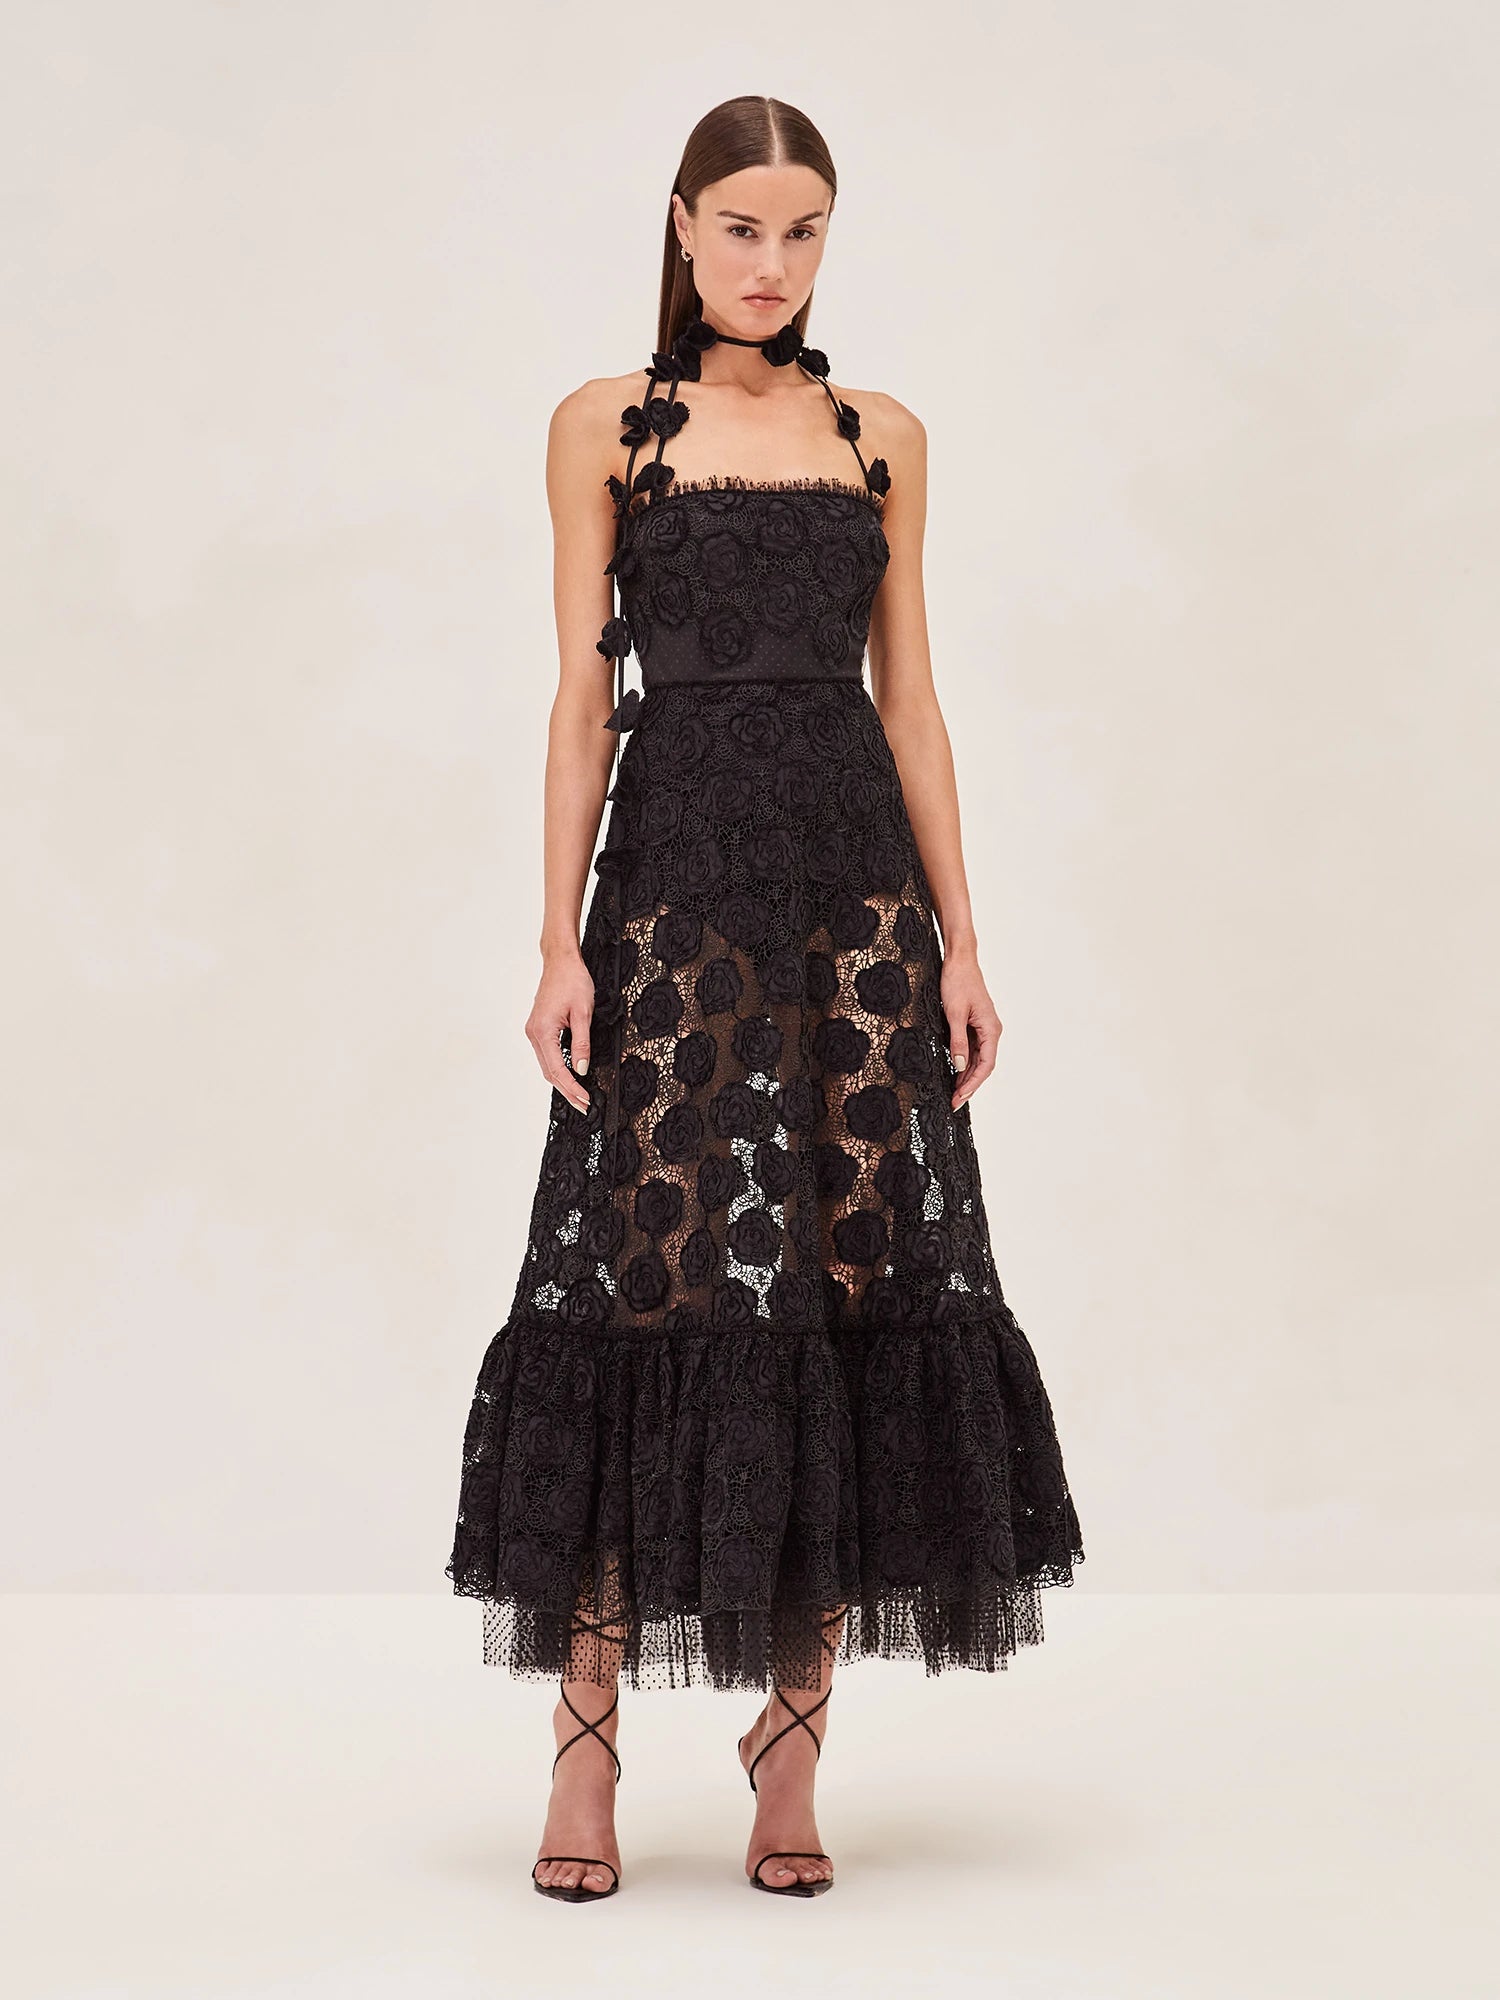 Alexis black lace midi dress with floral patterns and halter neck and removable skirt lining.